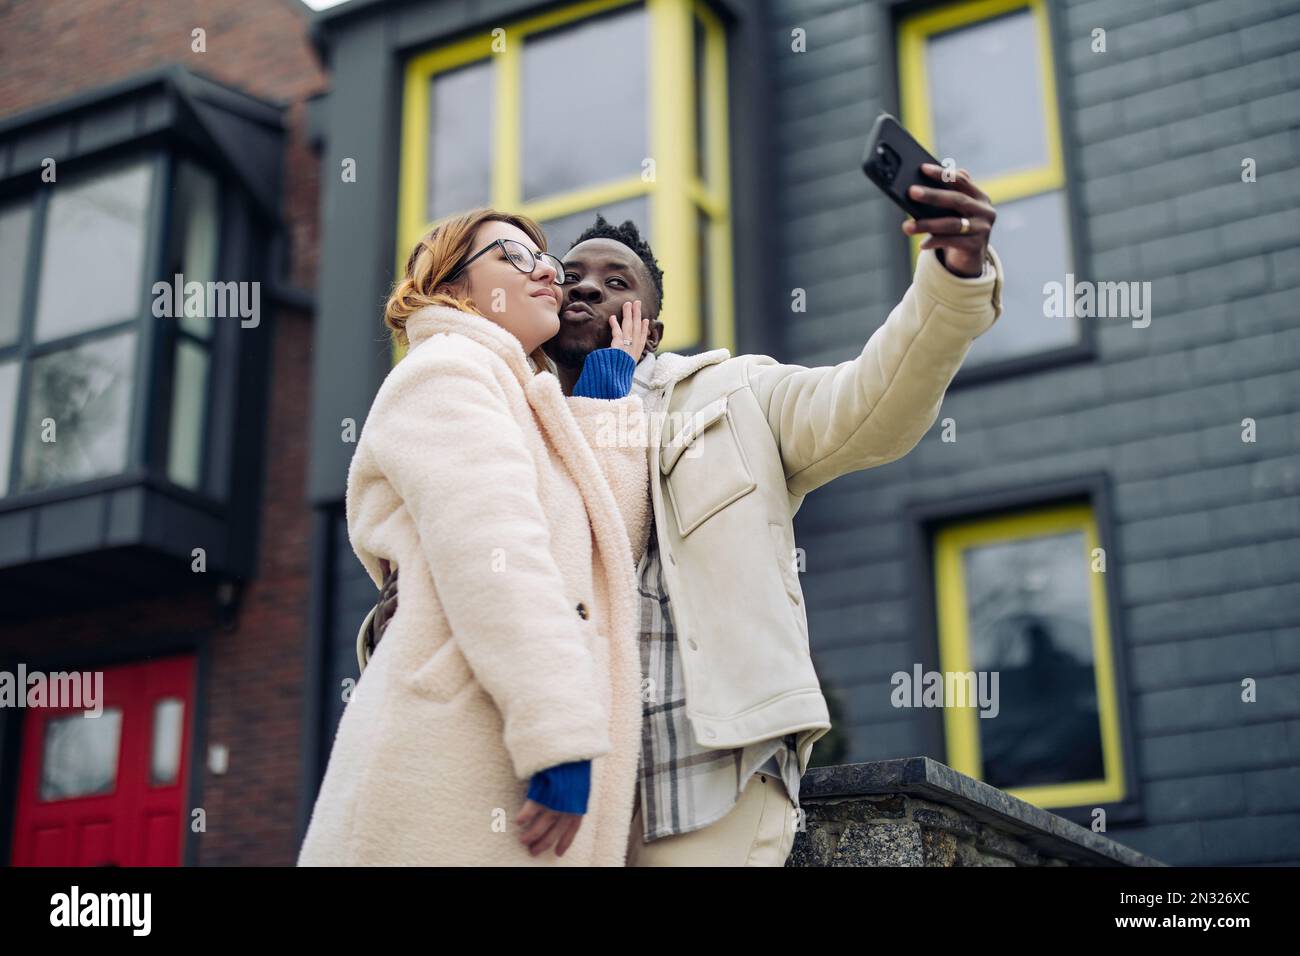 Young interracial couple takes a selfie together on street against background of houses. Concept of love relationships and unity between different hum Stock Photo